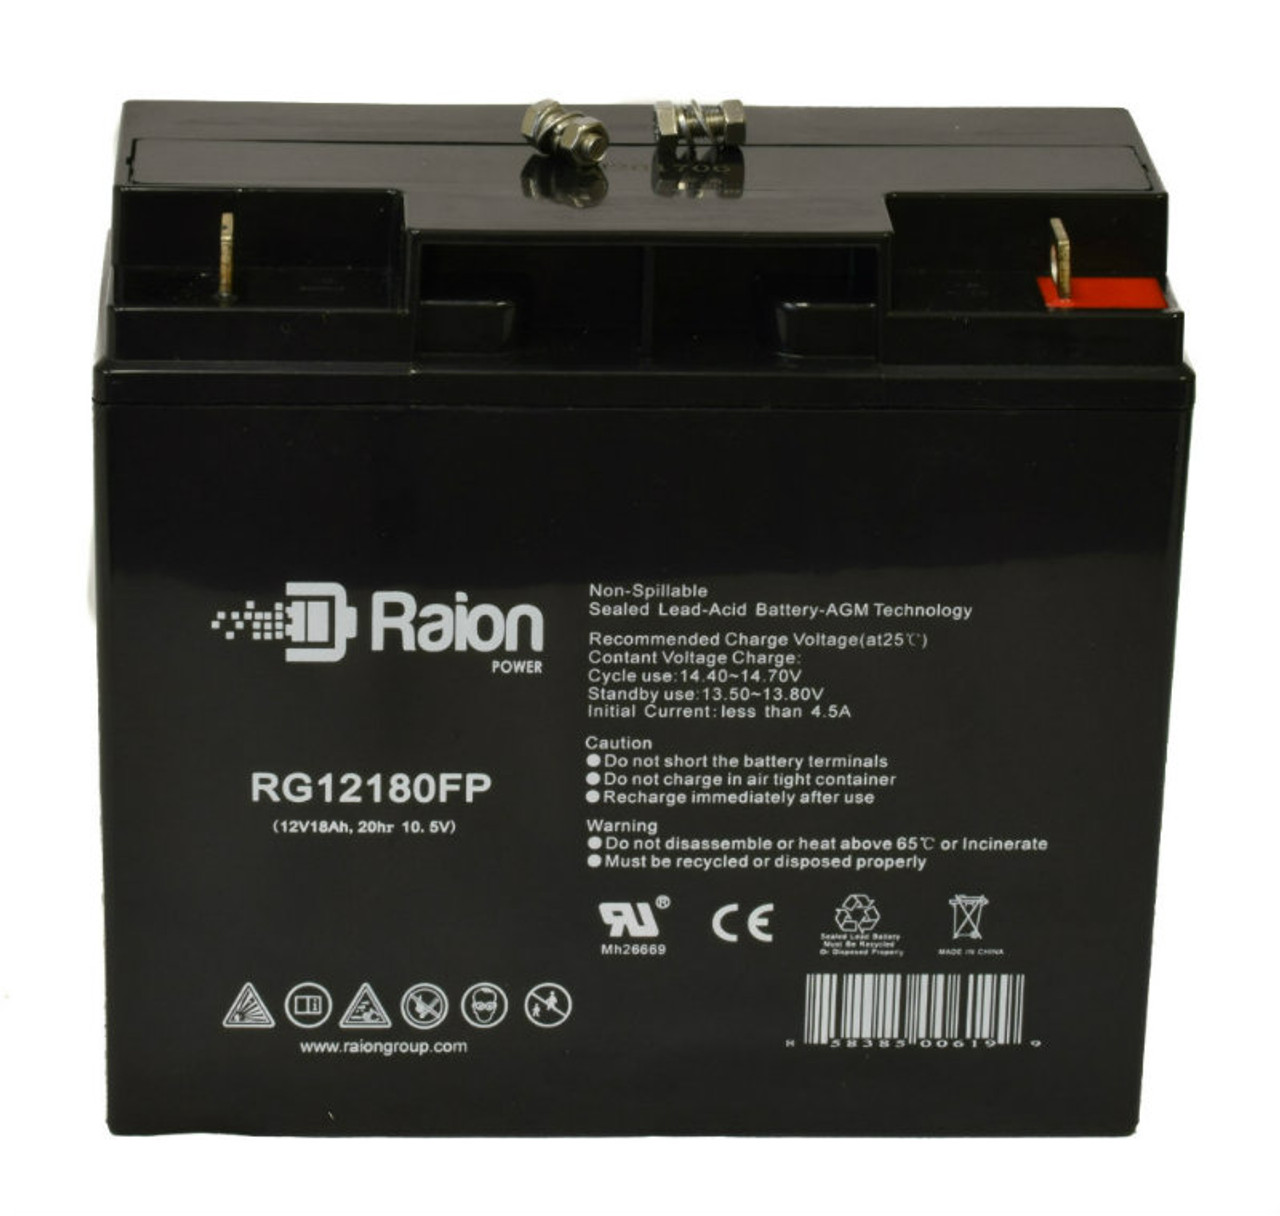 Raion Power RG12180FP 12V 18Ah AGM Battery for Chicago Electric 39954 3-in-1 Jump Starter